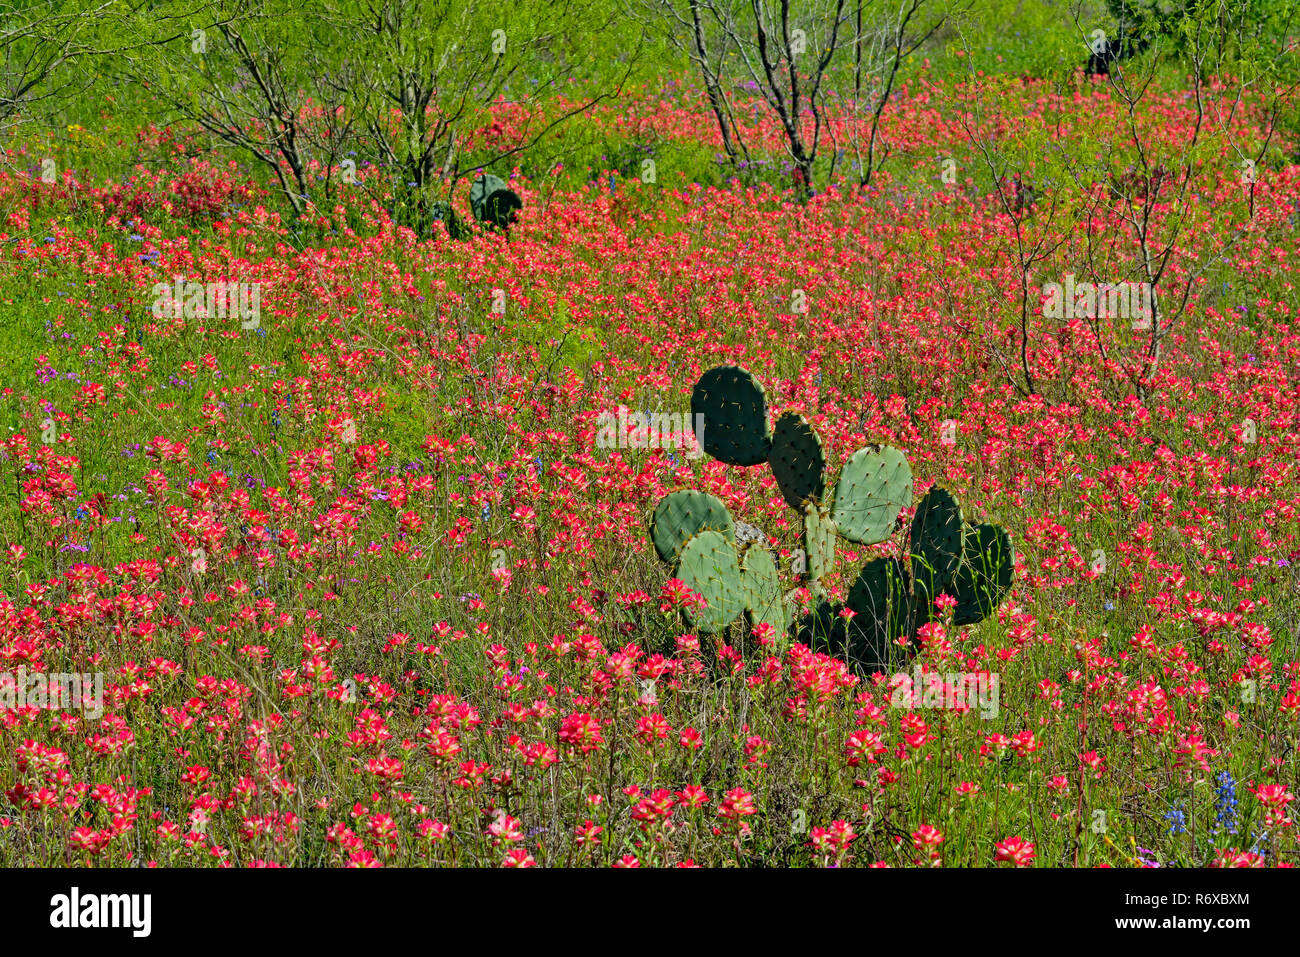 Texas paintbrush and prickly pear cactus, FM 2504 near Somerset, Texas, USA Stock Photo